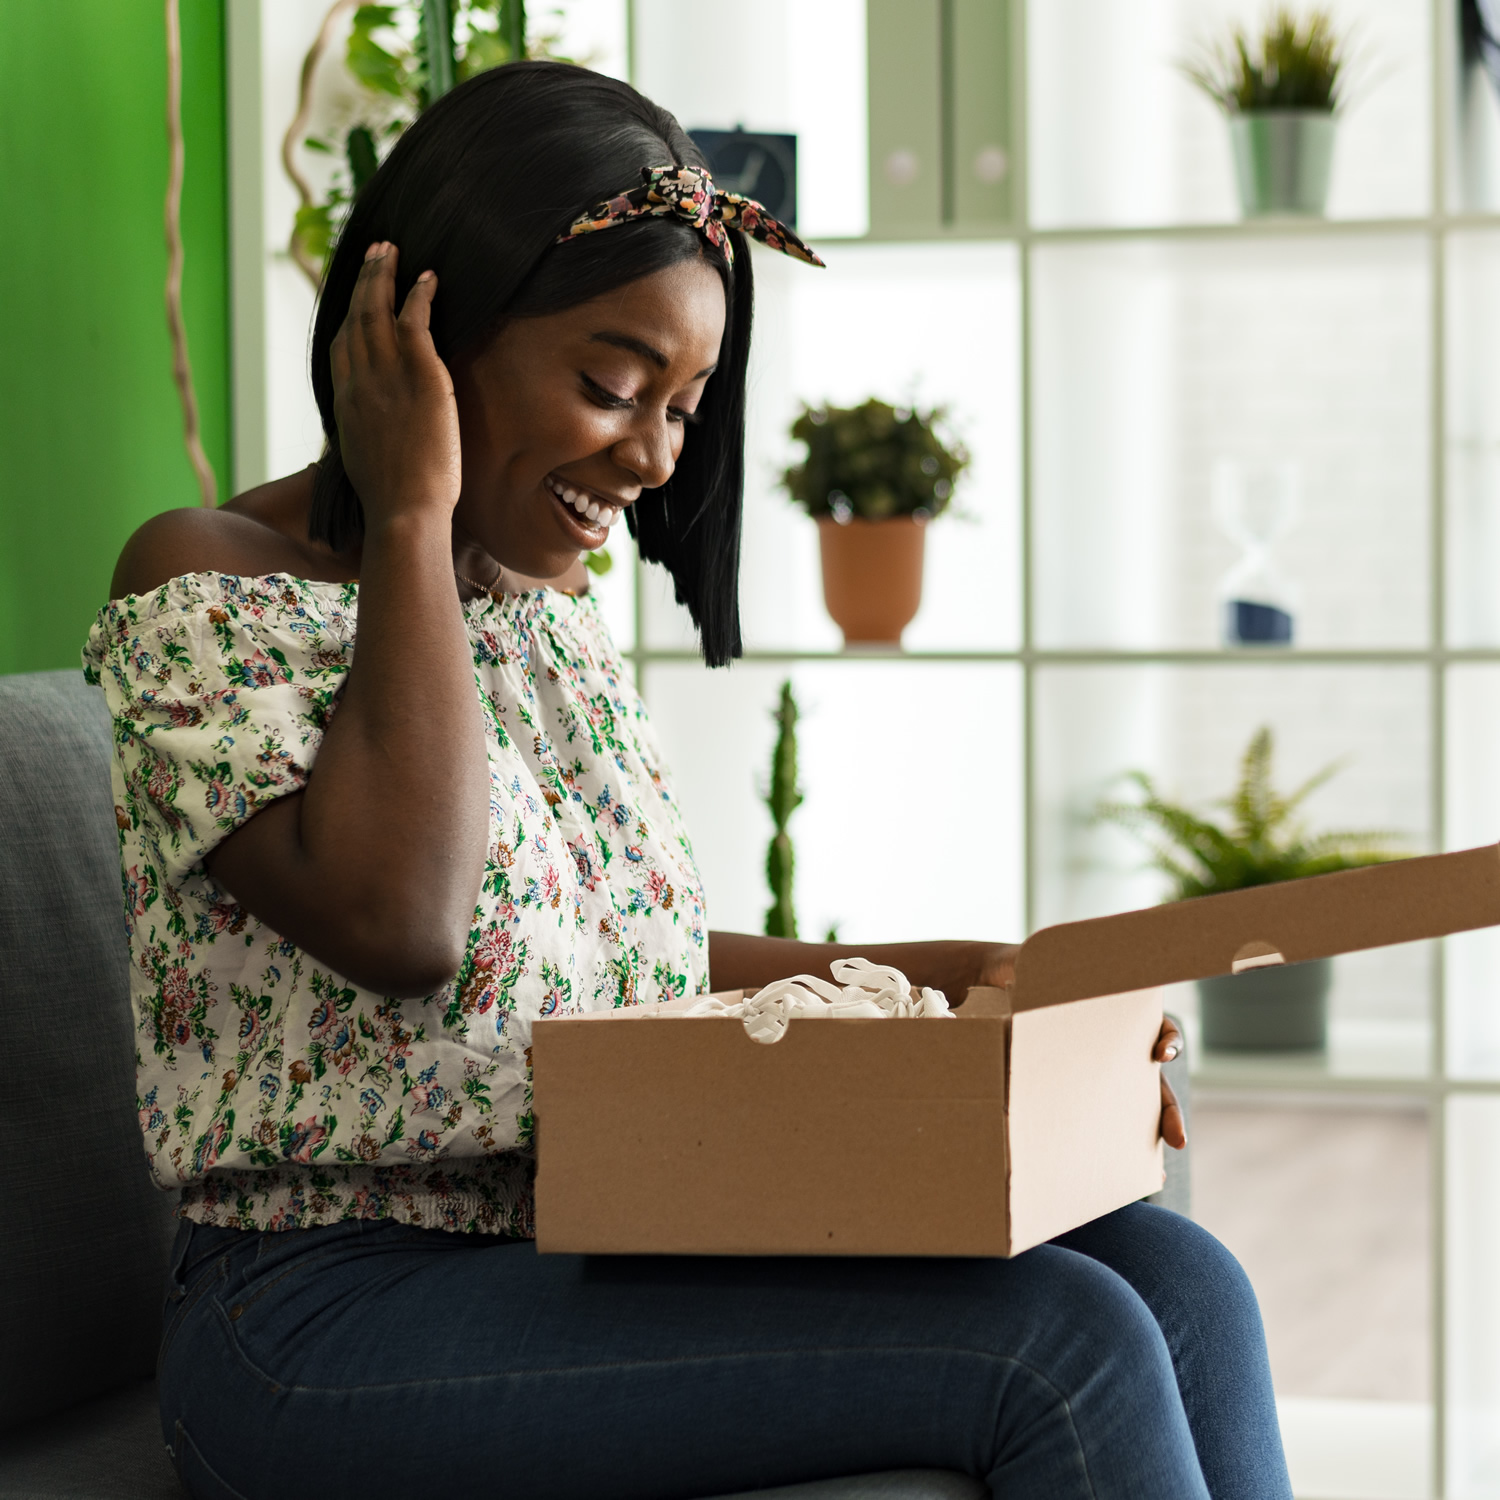 A woman wearing a floral top and headband sits on a couch, smiling while opening a cardboard box. Surrounded by plants and shelves, the scene perfectly captures the joy of home deliveries straight from the warehouse.